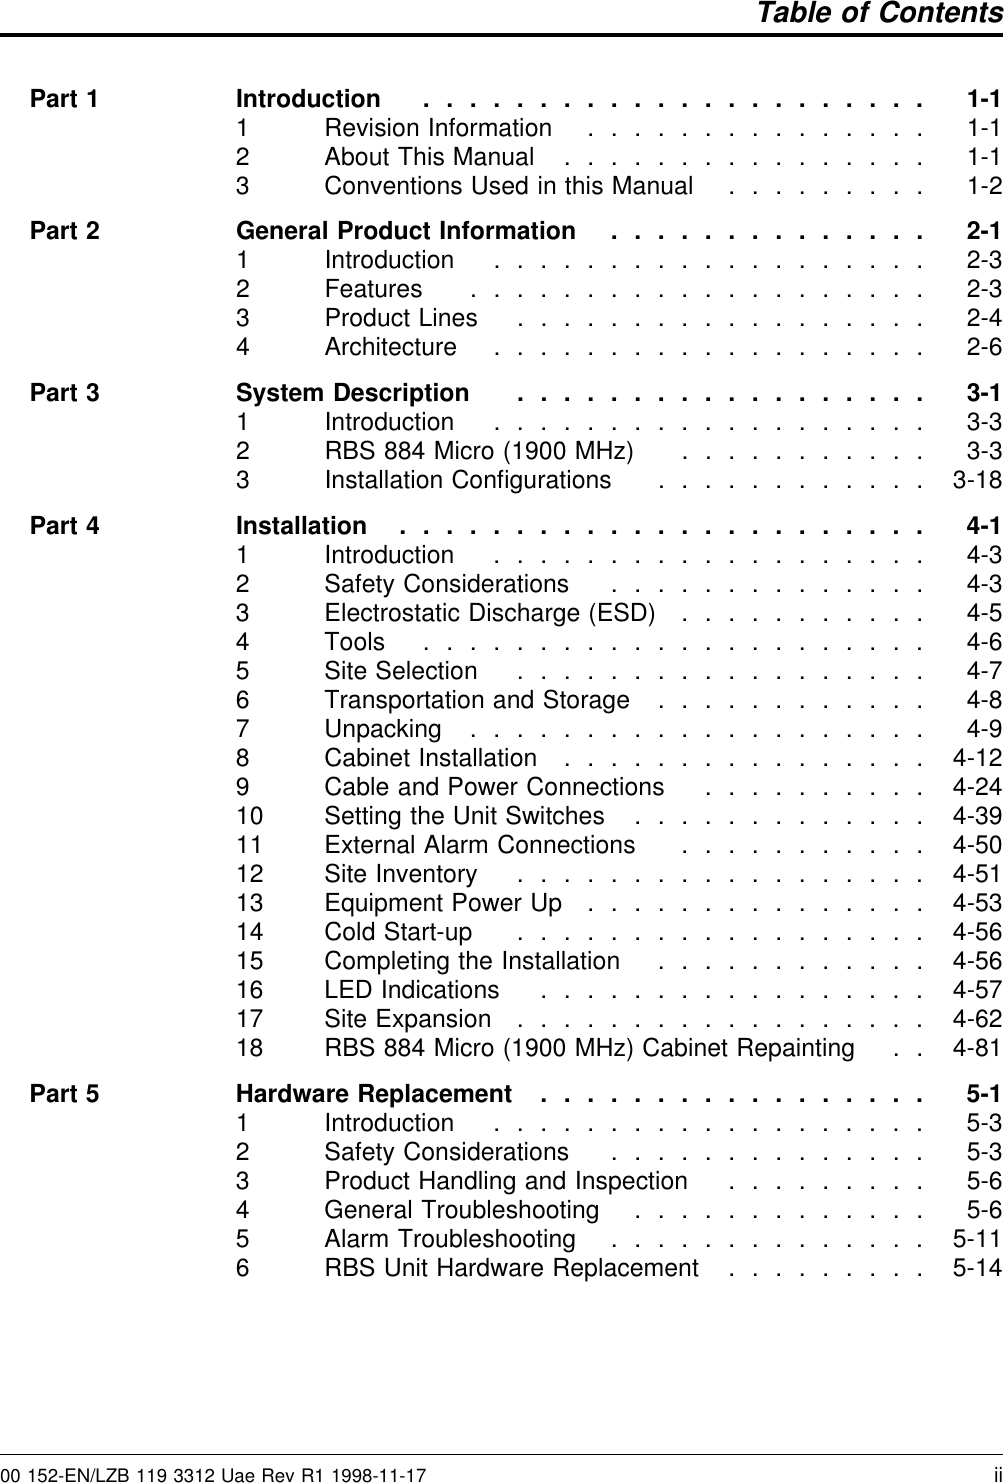 Table of ContentsPart 1 Introduction ...................... 1-11 Revision Information ............... 1-12 About This Manual ................ 1-13 Conventions Used in this Manual ......... 1-2Part 2 General Product Information .............. 2-11 Introduction ................... 2-32 Features .................... 2-33 Product Lines .................. 2-44 Architecture ................... 2-6Part 3 System Description .................. 3-11 Introduction ................... 3-32 RBS 884 Micro (1900 MHz) ........... 3-33 Installation Conﬁgurations ............ 3-18Part 4 Installation ....................... 4-11 Introduction ................... 4-32 Safety Considerations .............. 4-33 Electrostatic Discharge (ESD) ........... 4-54 Tools ...................... 4-65 Site Selection .................. 4-76 Transportation and Storage ............ 4-87 Unpacking .................... 4-98 Cabinet Installation ................ 4-129 Cable and Power Connections .......... 4-2410 Setting the Unit Switches ............. 4-3911 External Alarm Connections ........... 4-5012 Site Inventory .................. 4-5113 Equipment Power Up ............... 4-5314 Cold Start-up .................. 4-5615 Completing the Installation ............ 4-5616 LED Indications ................. 4-5717 Site Expansion .................. 4-6218 RBS 884 Micro (1900 MHz) Cabinet Repainting . . 4-81Part 5 Hardware Replacement ................. 5-11 Introduction ................... 5-32 Safety Considerations .............. 5-33 Product Handling and Inspection ......... 5-64 General Troubleshooting ............. 5-65 Alarm Troubleshooting .............. 5-116 RBS Unit Hardware Replacement ......... 5-1400 152-EN/LZB 119 3312 Uae Rev R1 1998-11-17 ii